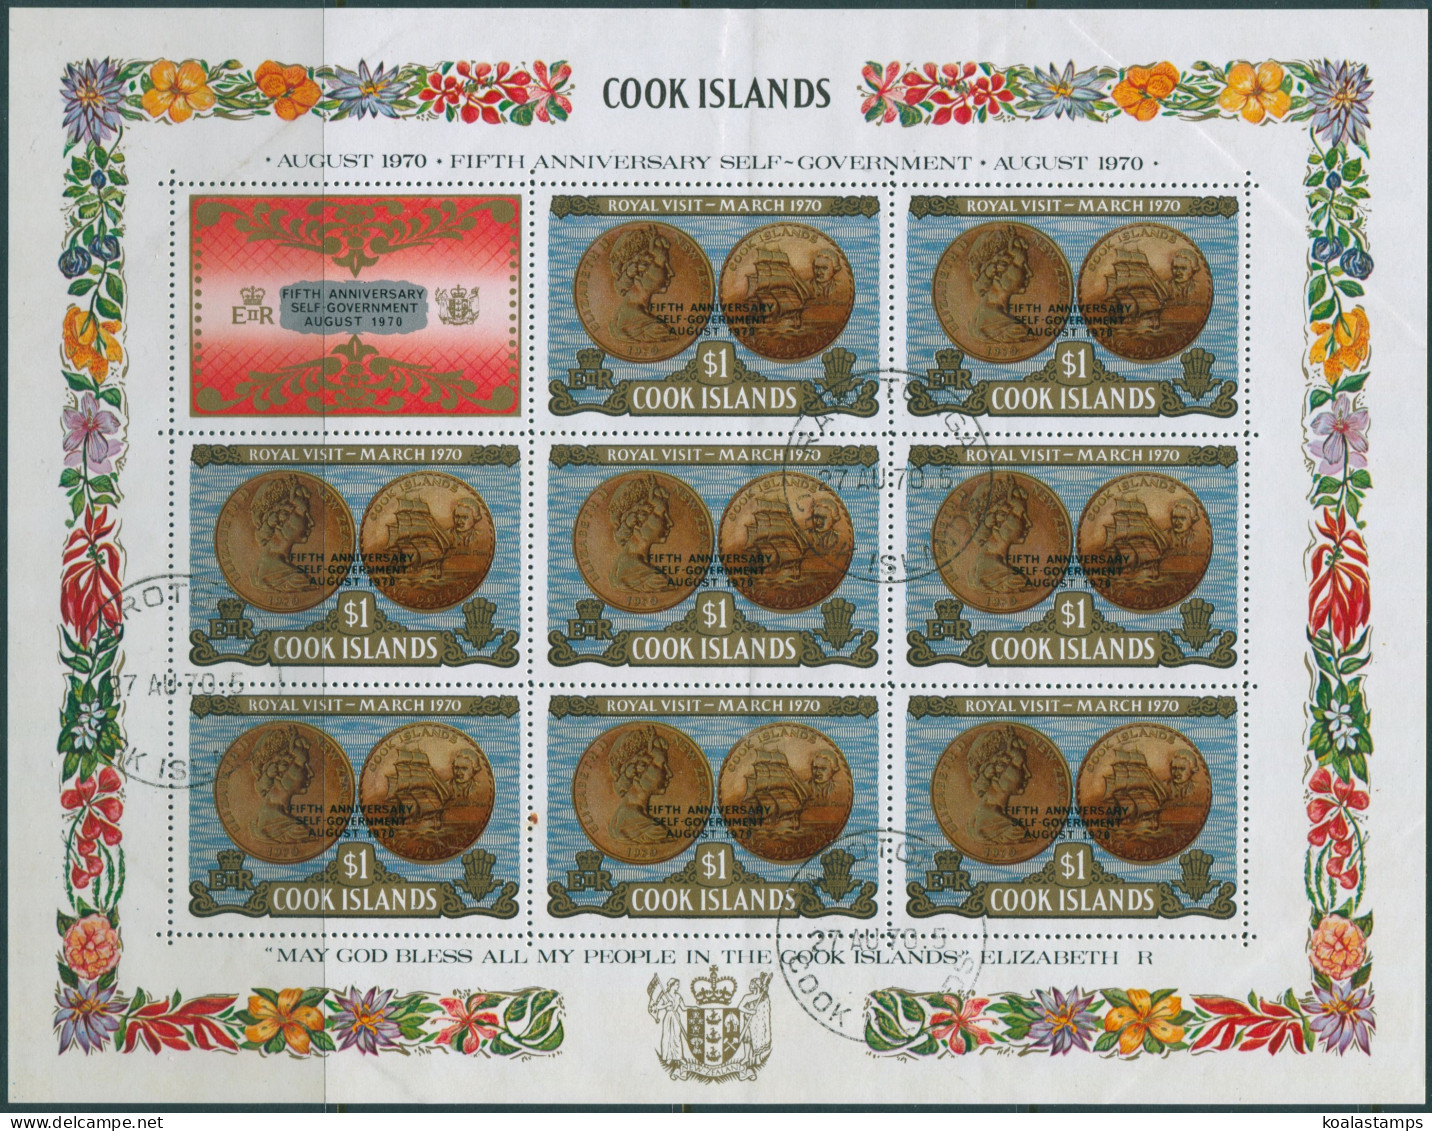 Cook Islands 1970 SG334 $1 Self-Government Ovpt Sheet FU - Cook